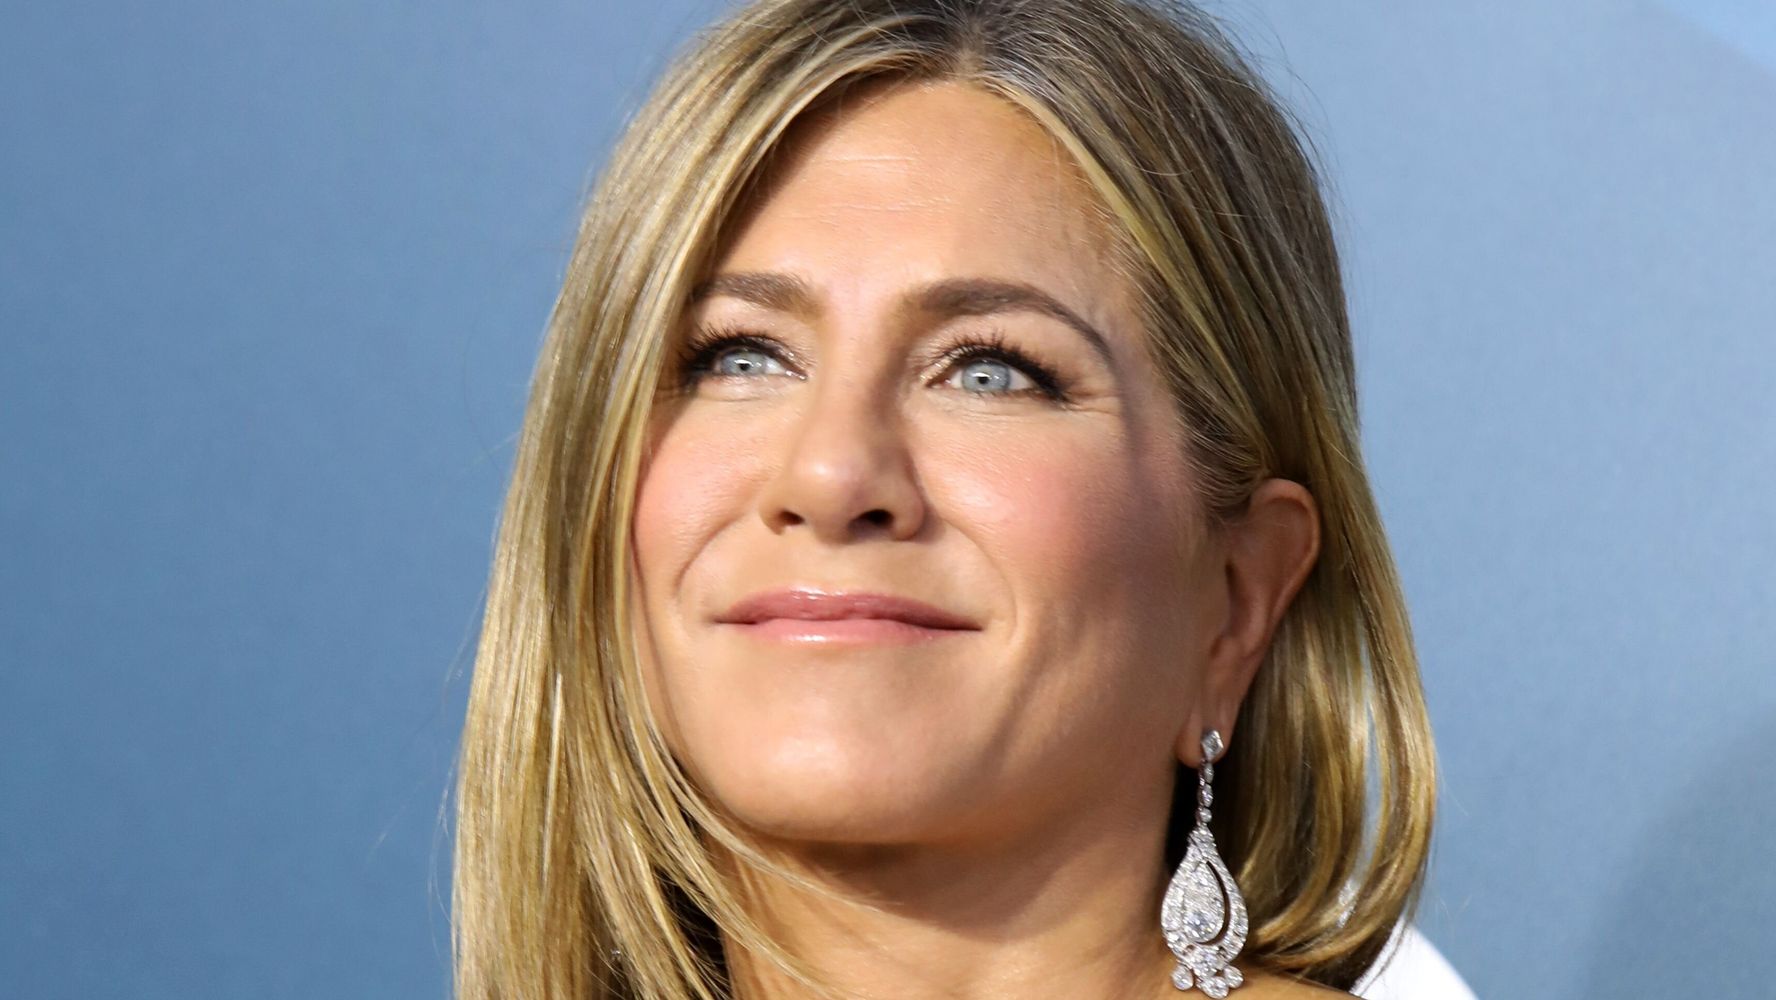 Voting For Kanye West Is 'Not Funny,' Warns Jennifer Aniston